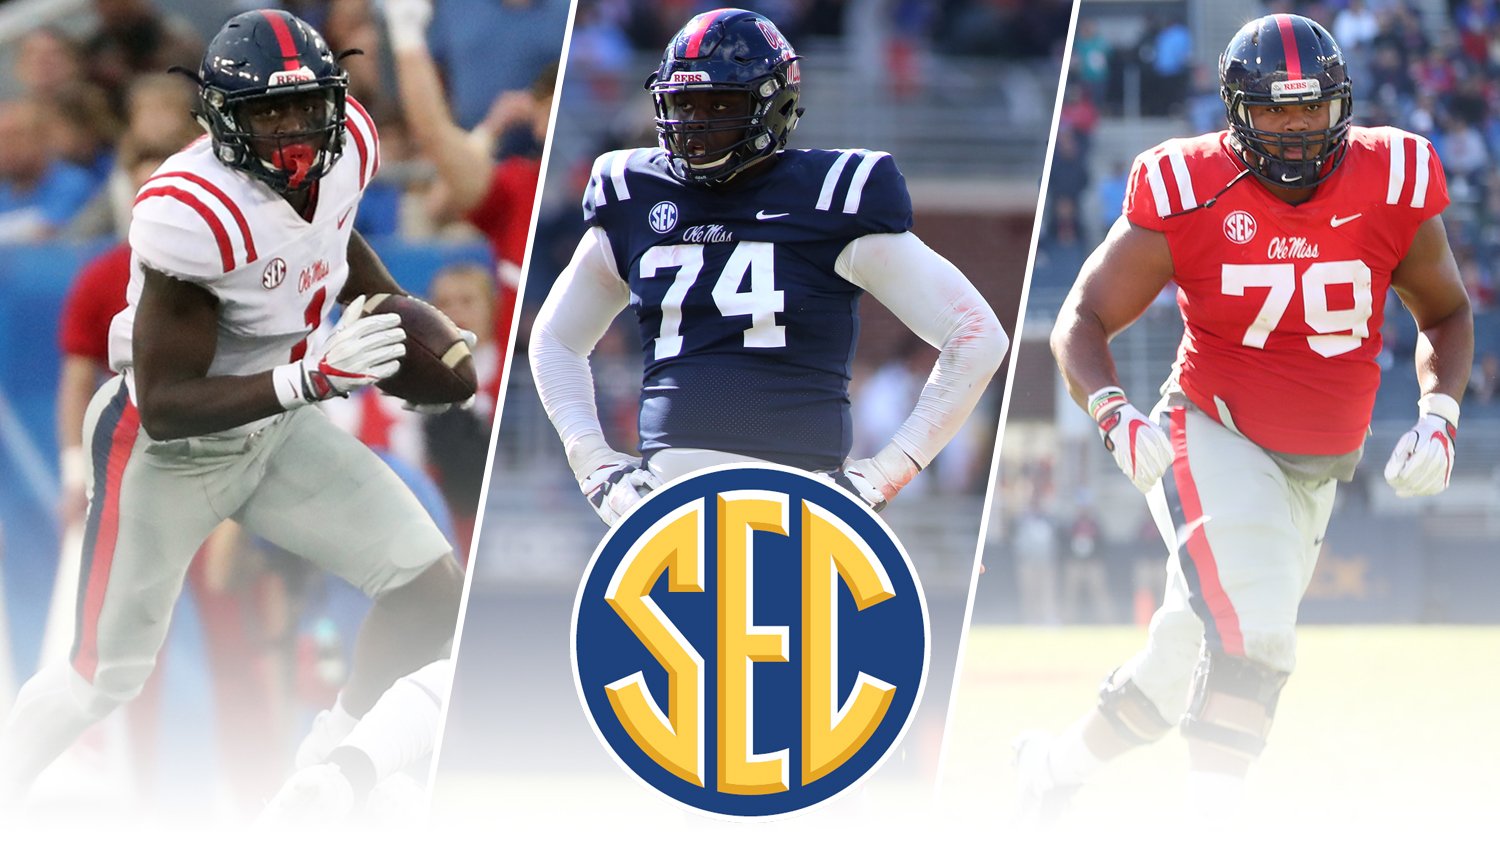 Ole Miss Football Today On Directv Customer International Society of Precision Agriculture